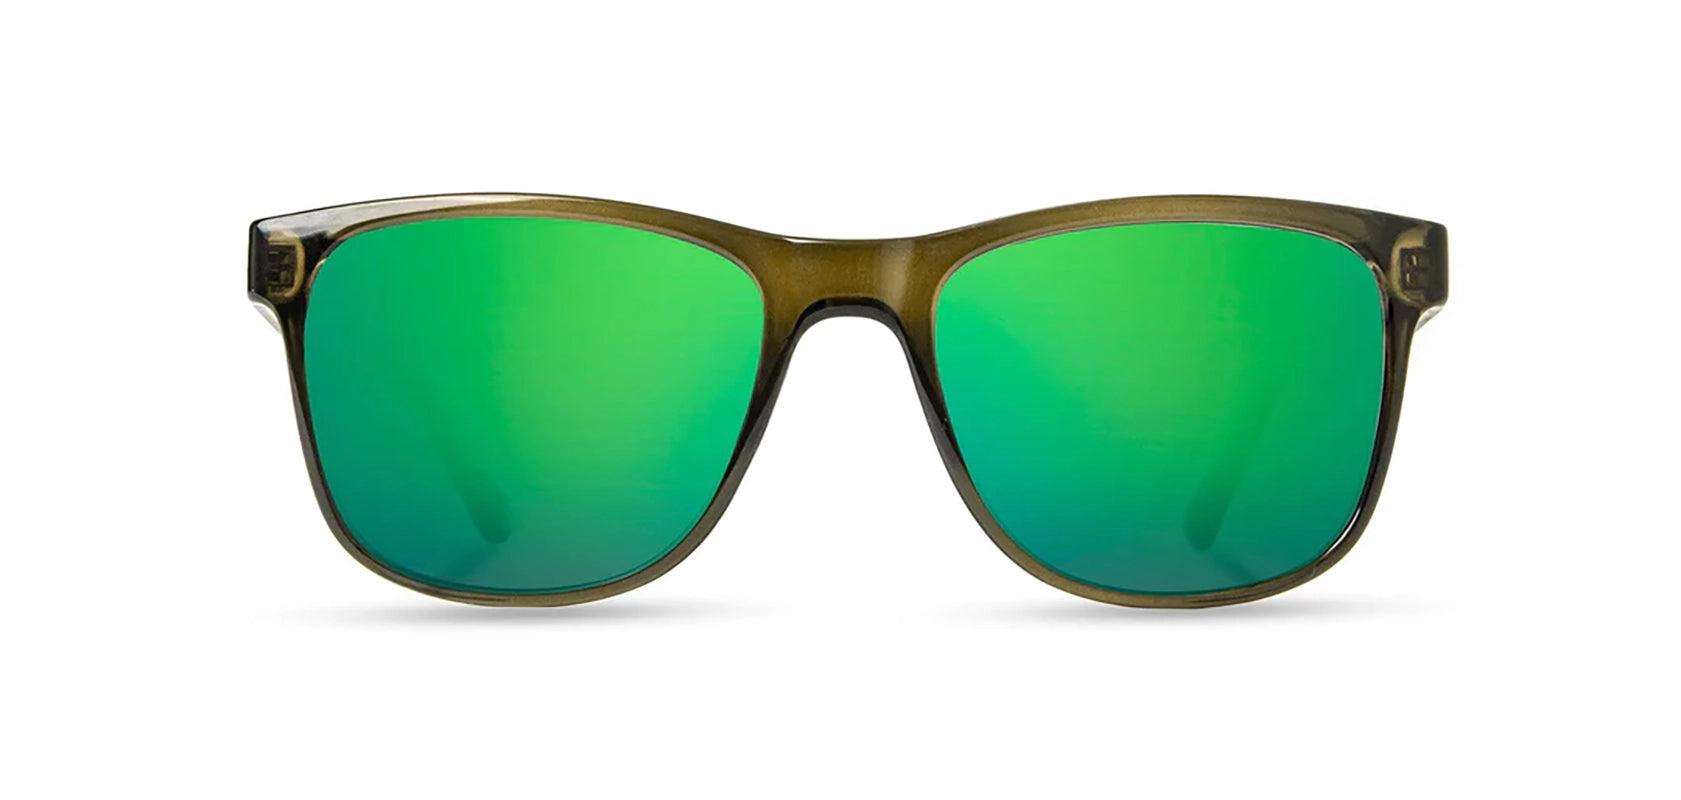 Camp Trail Sunglasses with Moss/Walnut frames and HD+ Green Flash Polarized lenses, front  view